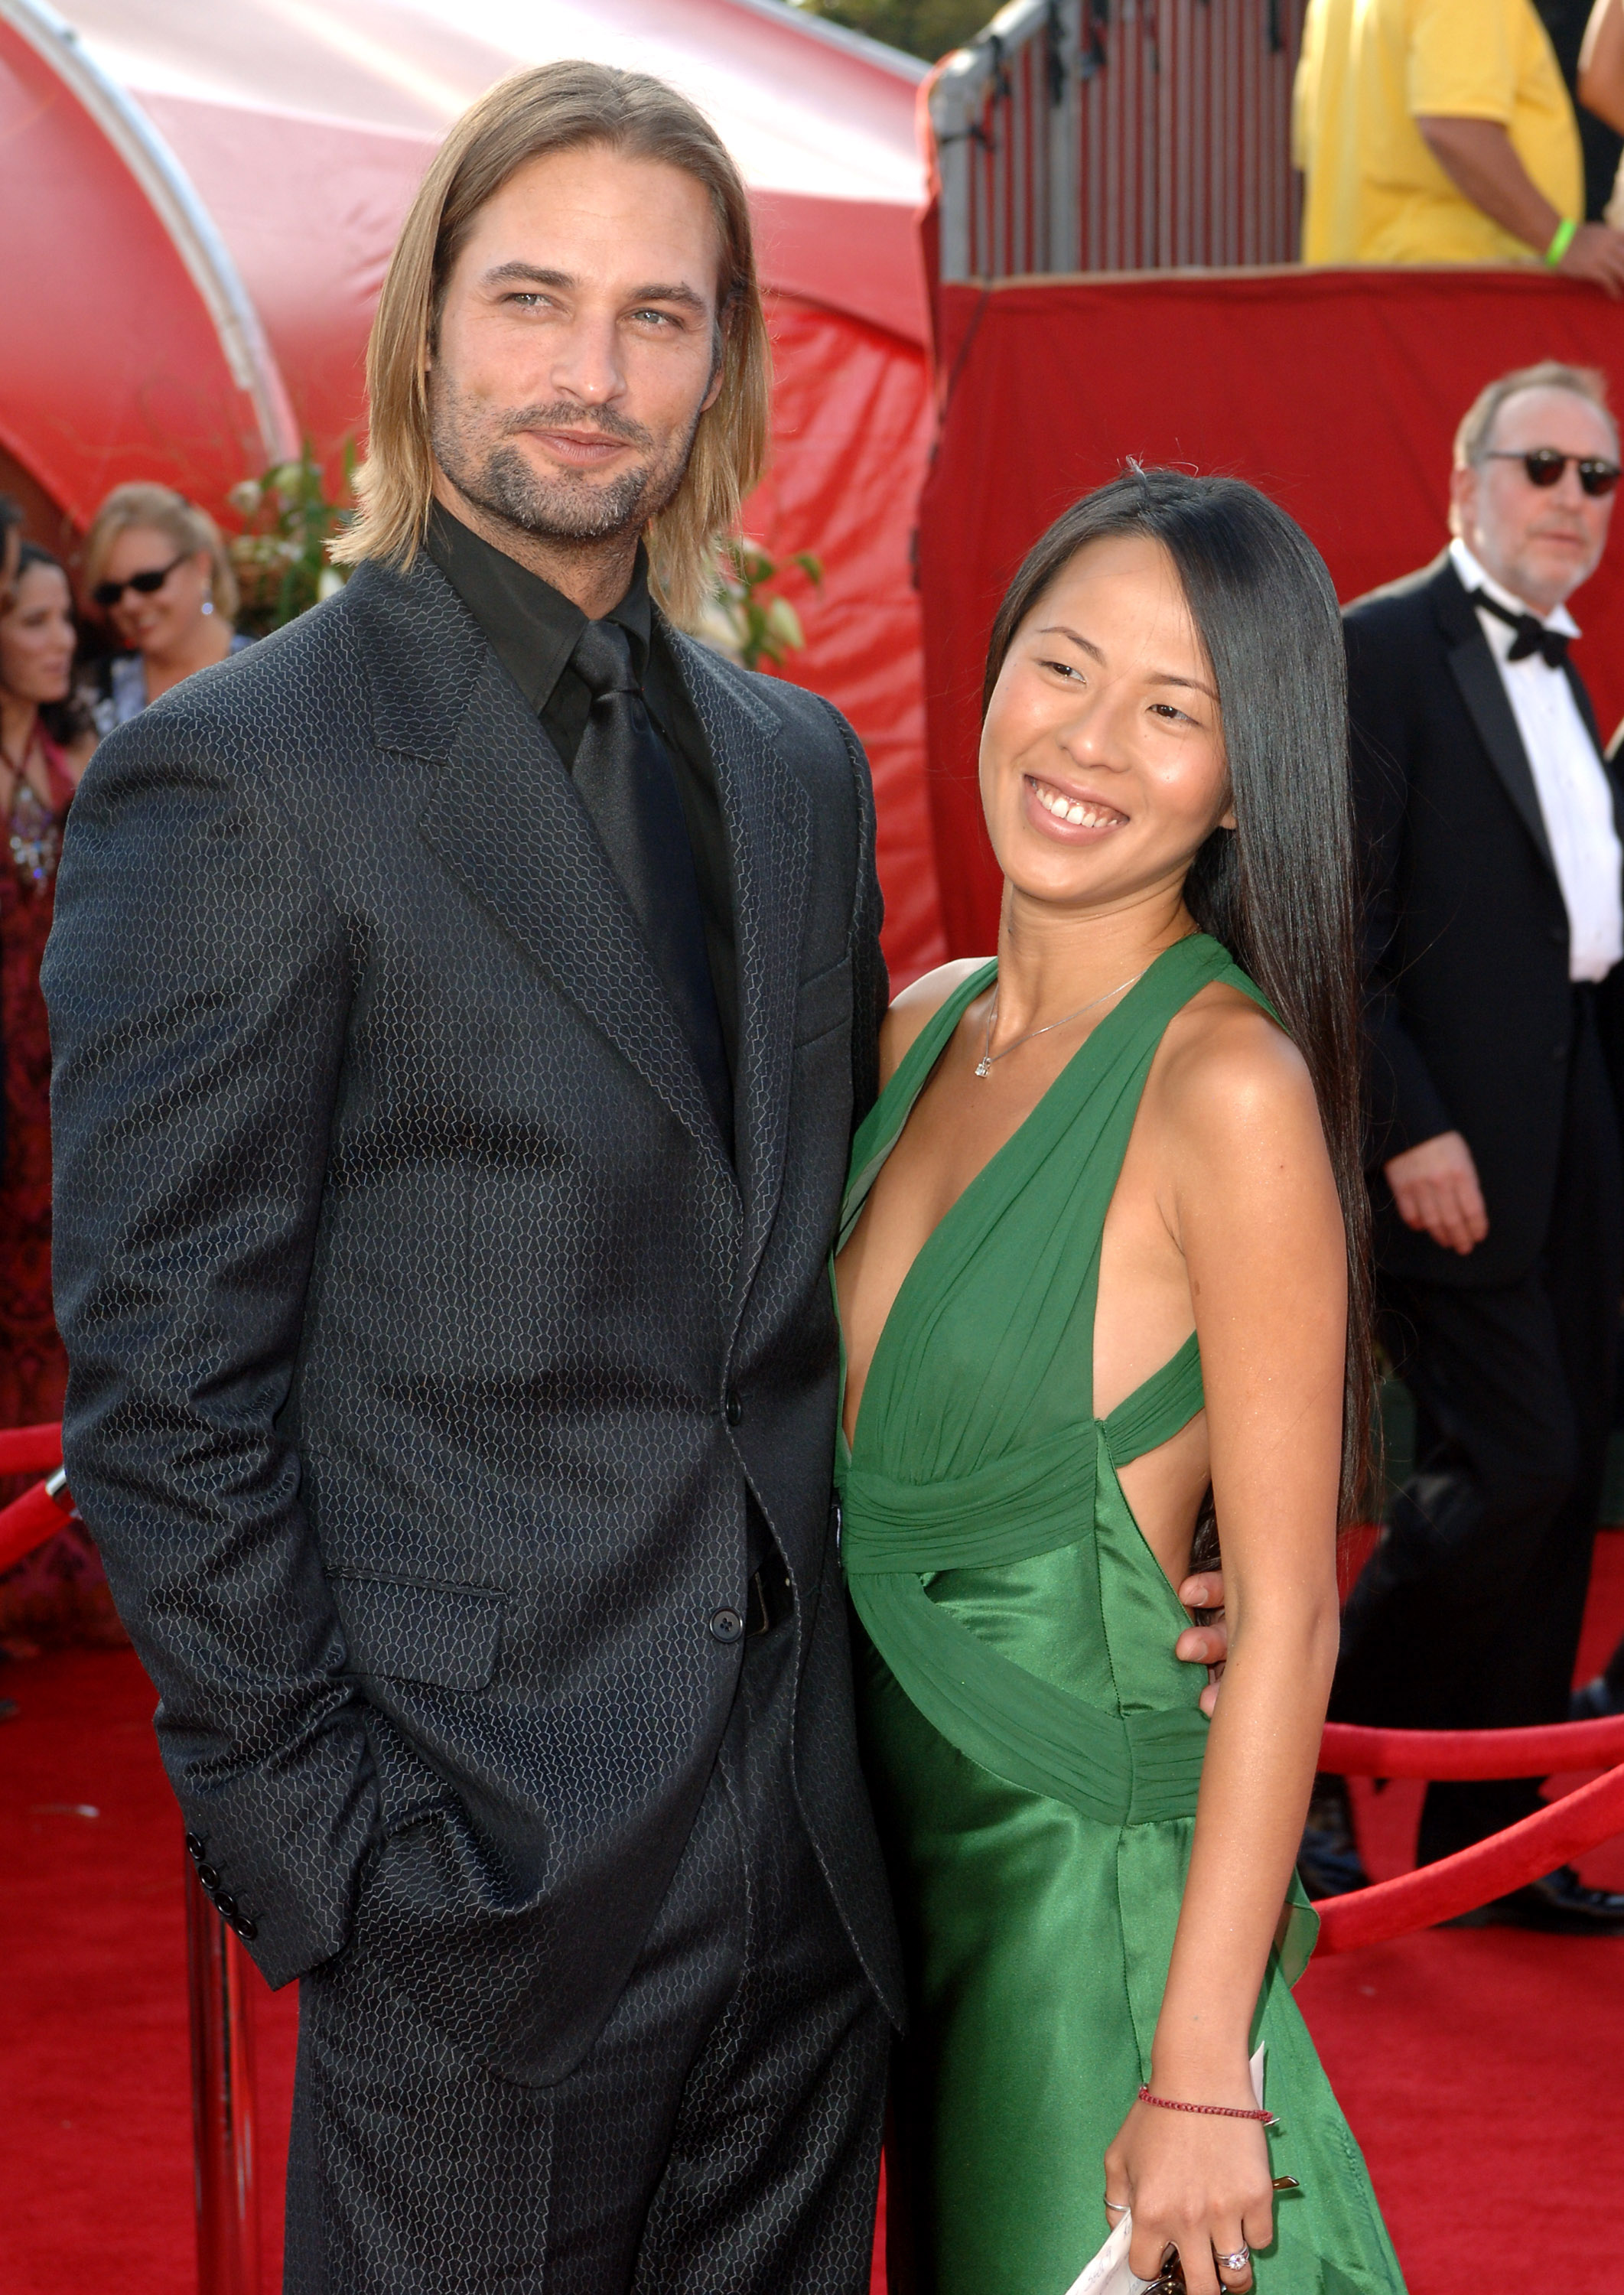 Josh Holloway and his wife Yessica Kumala during the 57th Annual Primetime Emmy Awards in Los Angeles, California, on September 18, 2005 | Source: Getty Images